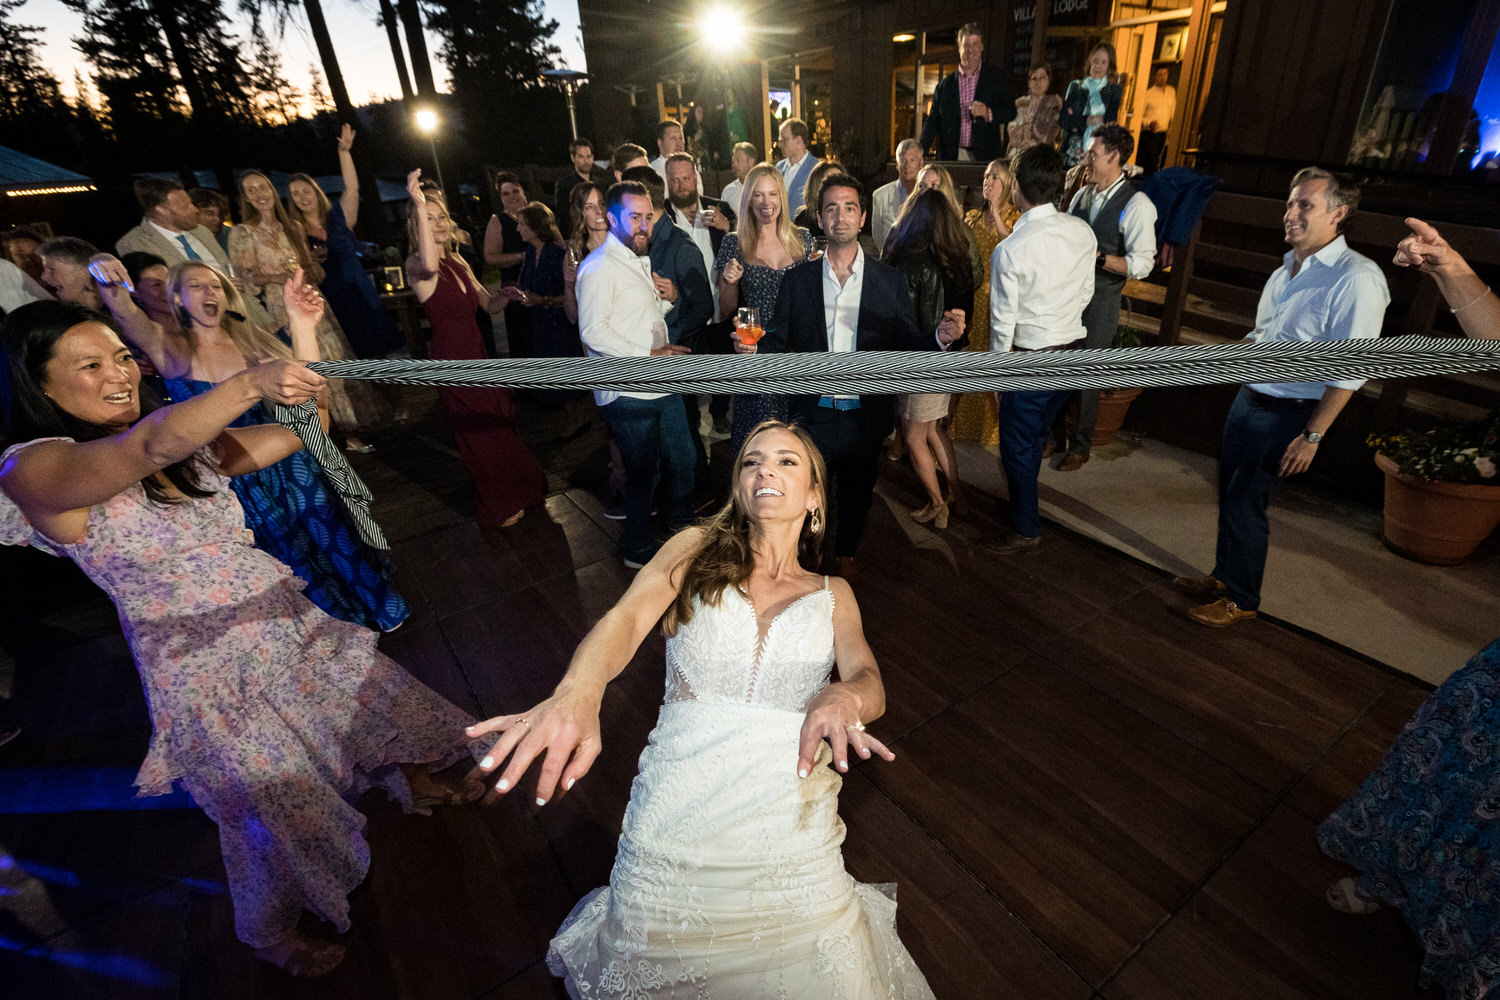 Wedding guests create a fun wedding game for the dance floor- limbo using a long scarf!